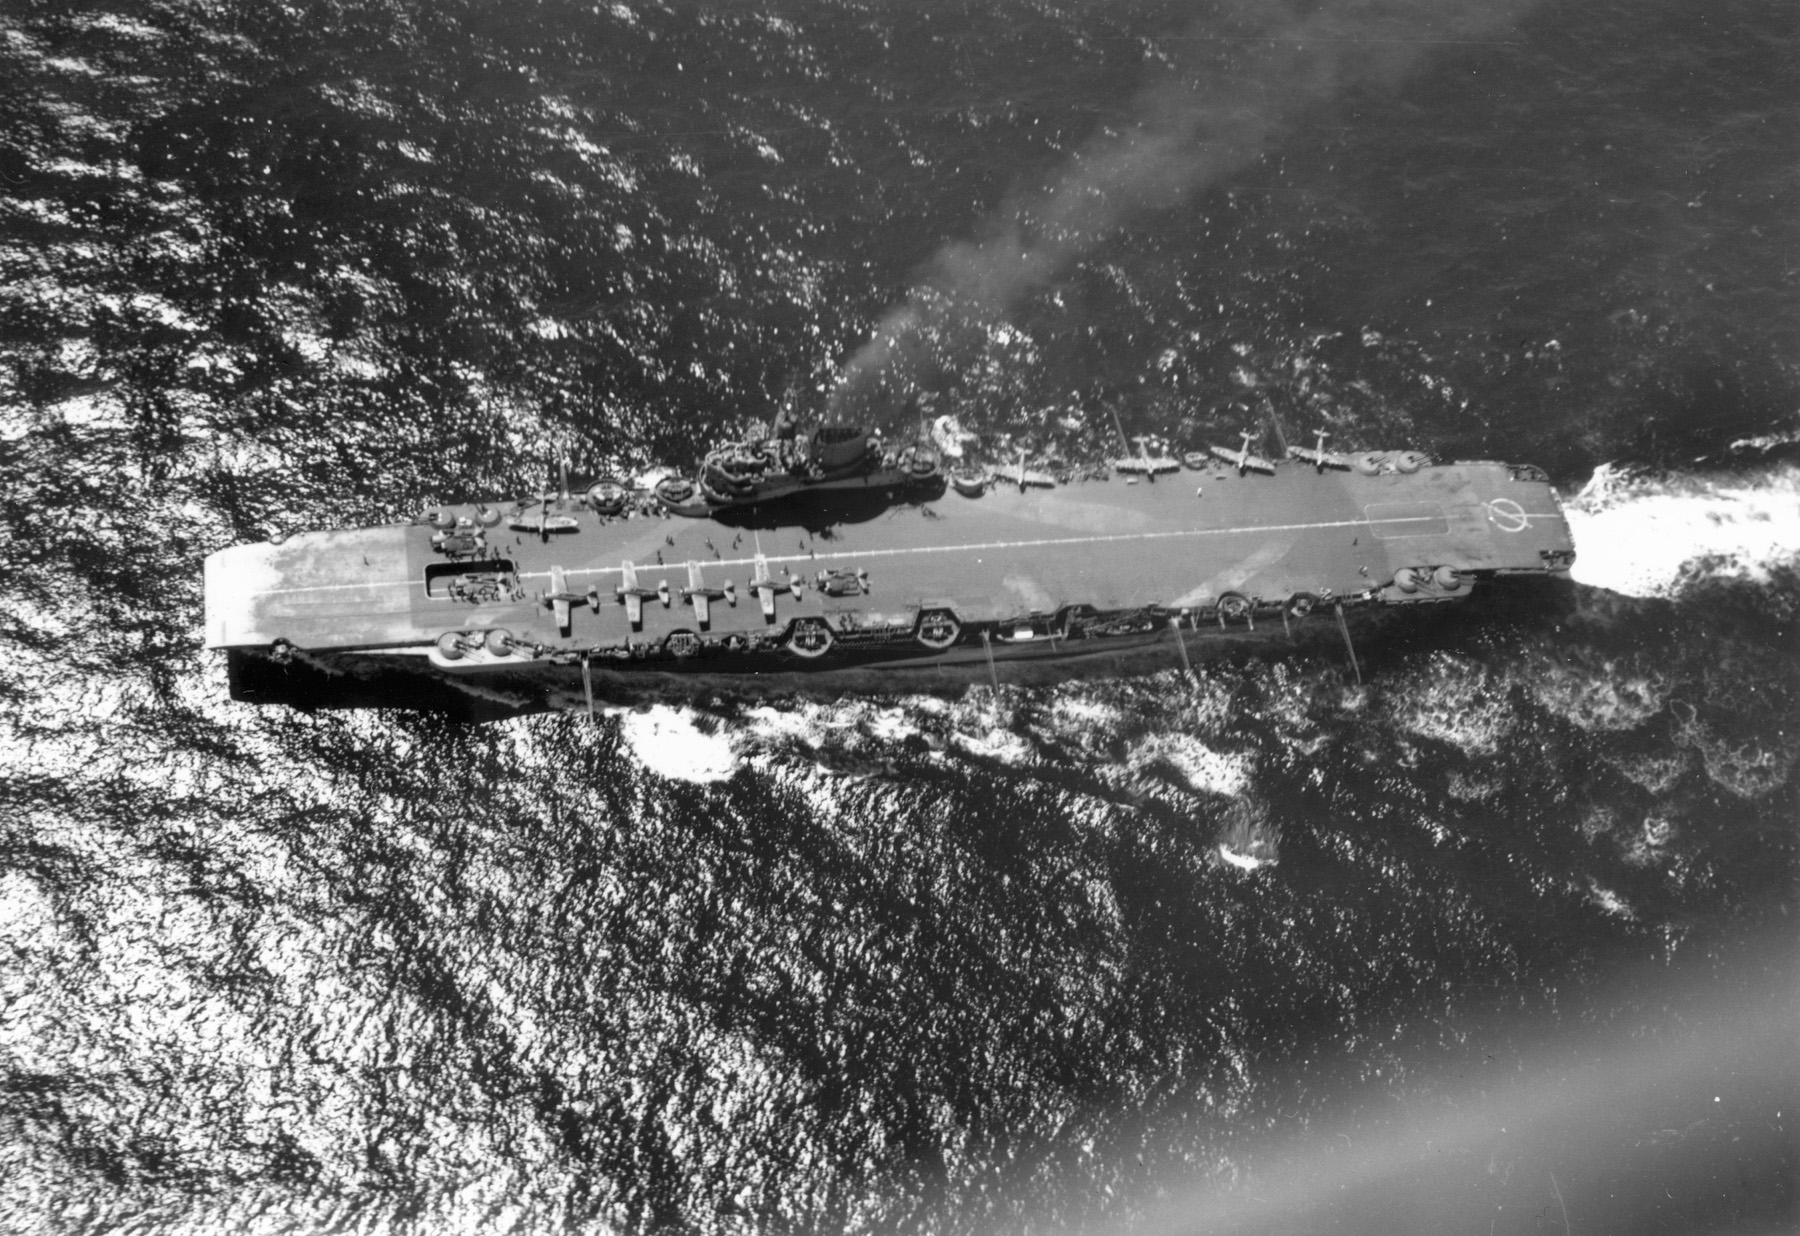 HMS Formidable steams ahead in the Atlantic. The armored carrier also saw action in the Mediterranean and the Pacific, sustaining damage inflicted by both German and Japanese forces.